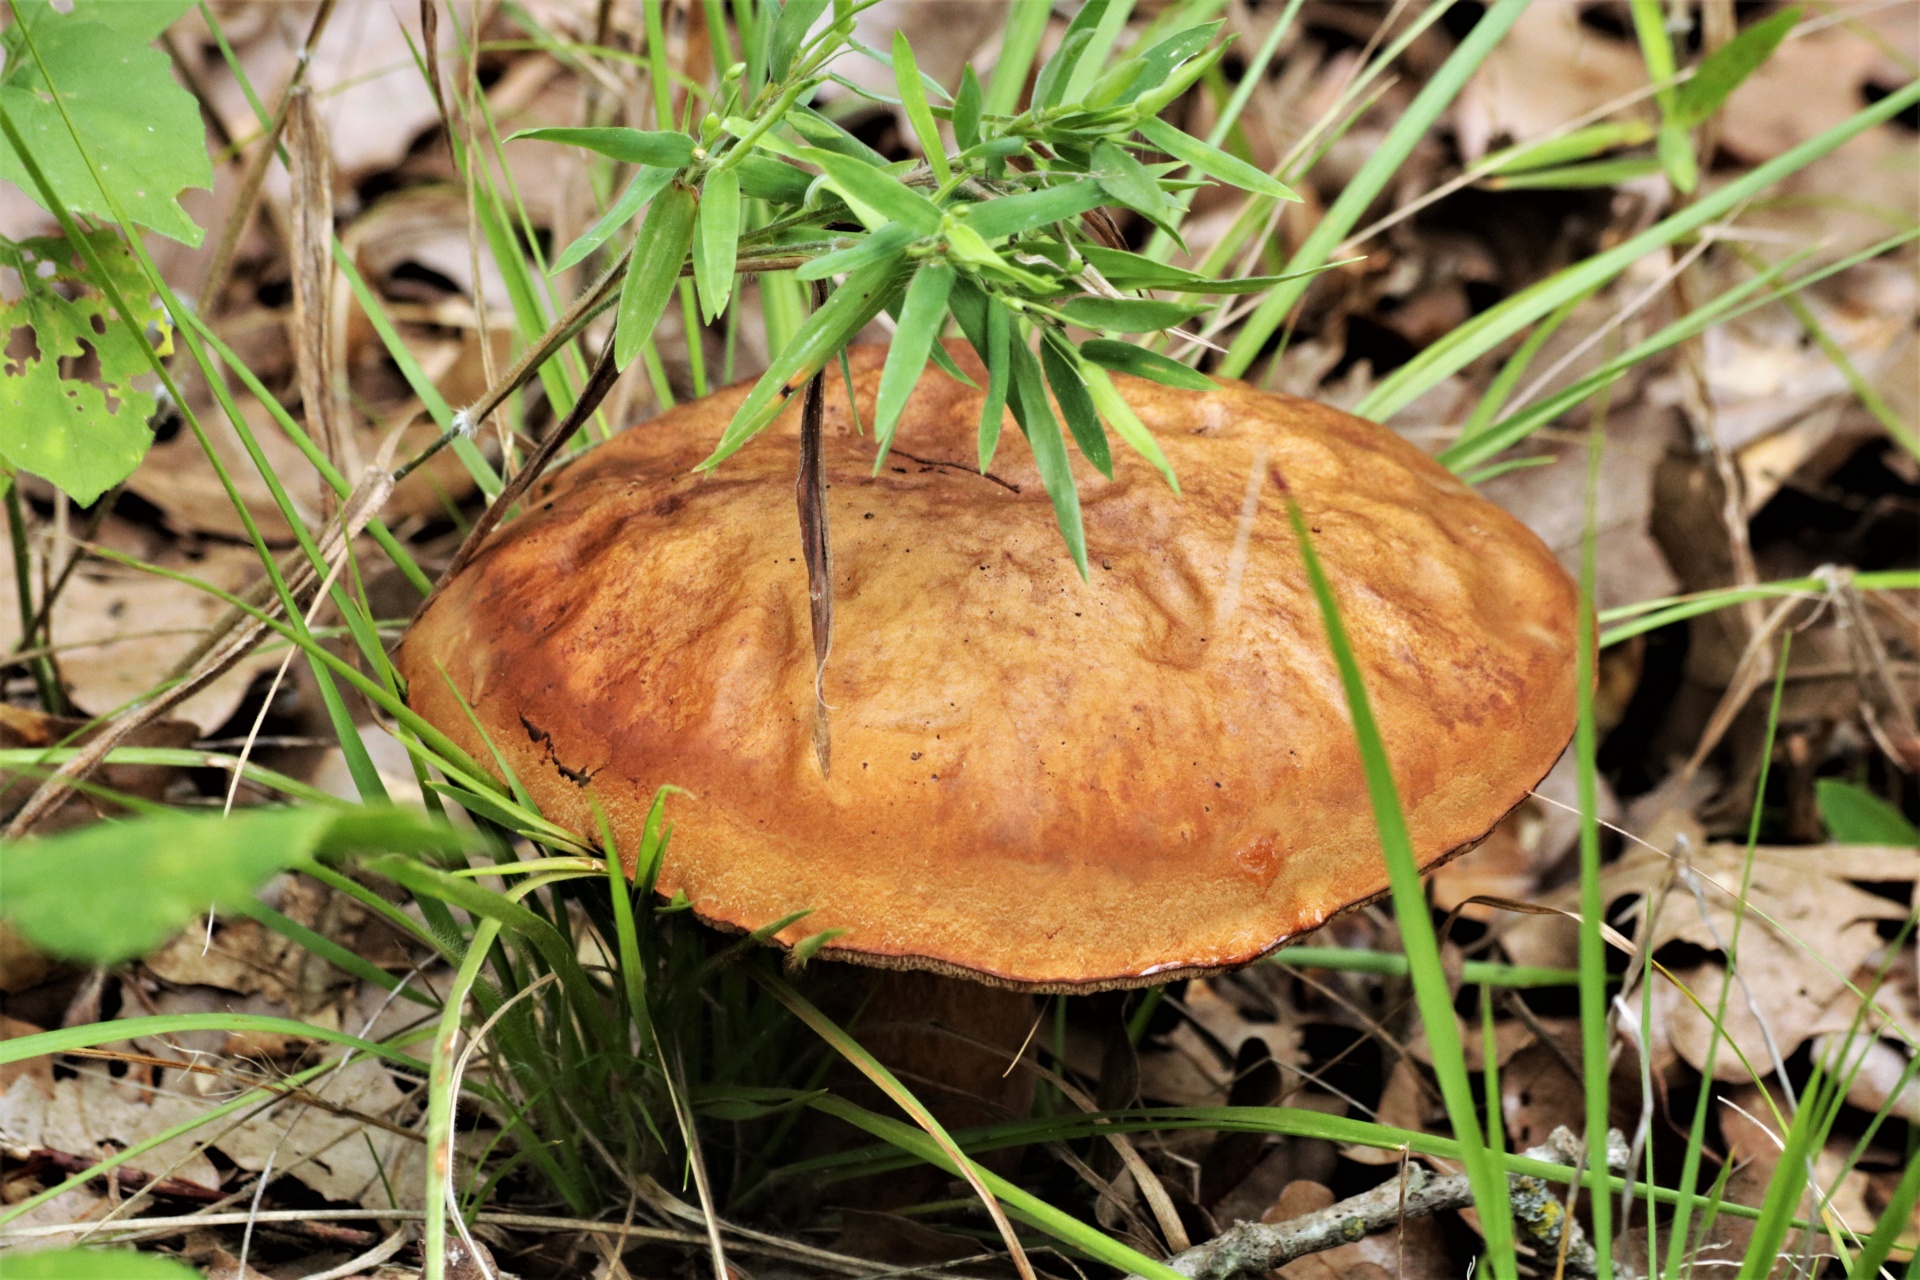 Close-up of a golden brown bolete mushroom growing among brown leaves and green blades of grass.